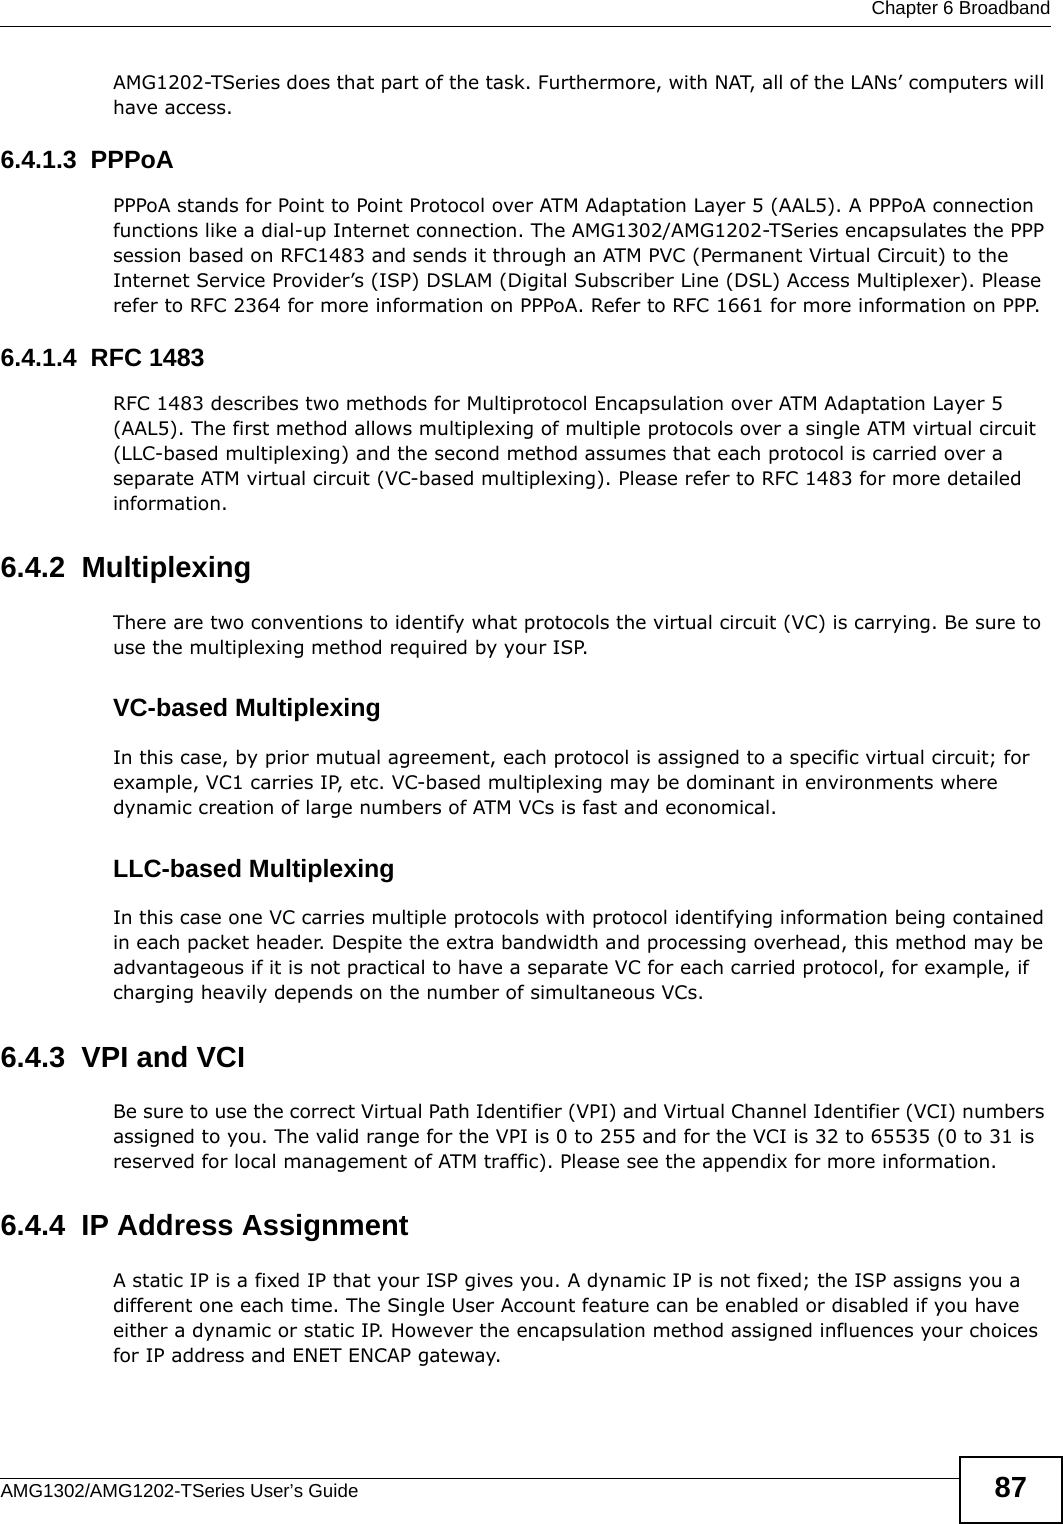  Chapter 6 BroadbandAMG1302/AMG1202-TSeries User’s Guide 87AMG1202-TSeries does that part of the task. Furthermore, with NAT, all of the LANs’ computers will have access.6.4.1.3  PPPoAPPPoA stands for Point to Point Protocol over ATM Adaptation Layer 5 (AAL5). A PPPoA connection functions like a dial-up Internet connection. The AMG1302/AMG1202-TSeries encapsulates the PPP session based on RFC1483 and sends it through an ATM PVC (Permanent Virtual Circuit) to the Internet Service Provider’s (ISP) DSLAM (Digital Subscriber Line (DSL) Access Multiplexer). Please refer to RFC 2364 for more information on PPPoA. Refer to RFC 1661 for more information on PPP.6.4.1.4  RFC 1483RFC 1483 describes two methods for Multiprotocol Encapsulation over ATM Adaptation Layer 5 (AAL5). The first method allows multiplexing of multiple protocols over a single ATM virtual circuit (LLC-based multiplexing) and the second method assumes that each protocol is carried over a separate ATM virtual circuit (VC-based multiplexing). Please refer to RFC 1483 for more detailed information.6.4.2  MultiplexingThere are two conventions to identify what protocols the virtual circuit (VC) is carrying. Be sure to use the multiplexing method required by your ISP.VC-based MultiplexingIn this case, by prior mutual agreement, each protocol is assigned to a specific virtual circuit; for example, VC1 carries IP, etc. VC-based multiplexing may be dominant in environments where dynamic creation of large numbers of ATM VCs is fast and economical.LLC-based MultiplexingIn this case one VC carries multiple protocols with protocol identifying information being contained in each packet header. Despite the extra bandwidth and processing overhead, this method may be advantageous if it is not practical to have a separate VC for each carried protocol, for example, if charging heavily depends on the number of simultaneous VCs.6.4.3  VPI and VCIBe sure to use the correct Virtual Path Identifier (VPI) and Virtual Channel Identifier (VCI) numbers assigned to you. The valid range for the VPI is 0 to 255 and for the VCI is 32 to 65535 (0 to 31 is reserved for local management of ATM traffic). Please see the appendix for more information.6.4.4  IP Address AssignmentA static IP is a fixed IP that your ISP gives you. A dynamic IP is not fixed; the ISP assigns you a different one each time. The Single User Account feature can be enabled or disabled if you have either a dynamic or static IP. However the encapsulation method assigned influences your choices for IP address and ENET ENCAP gateway.